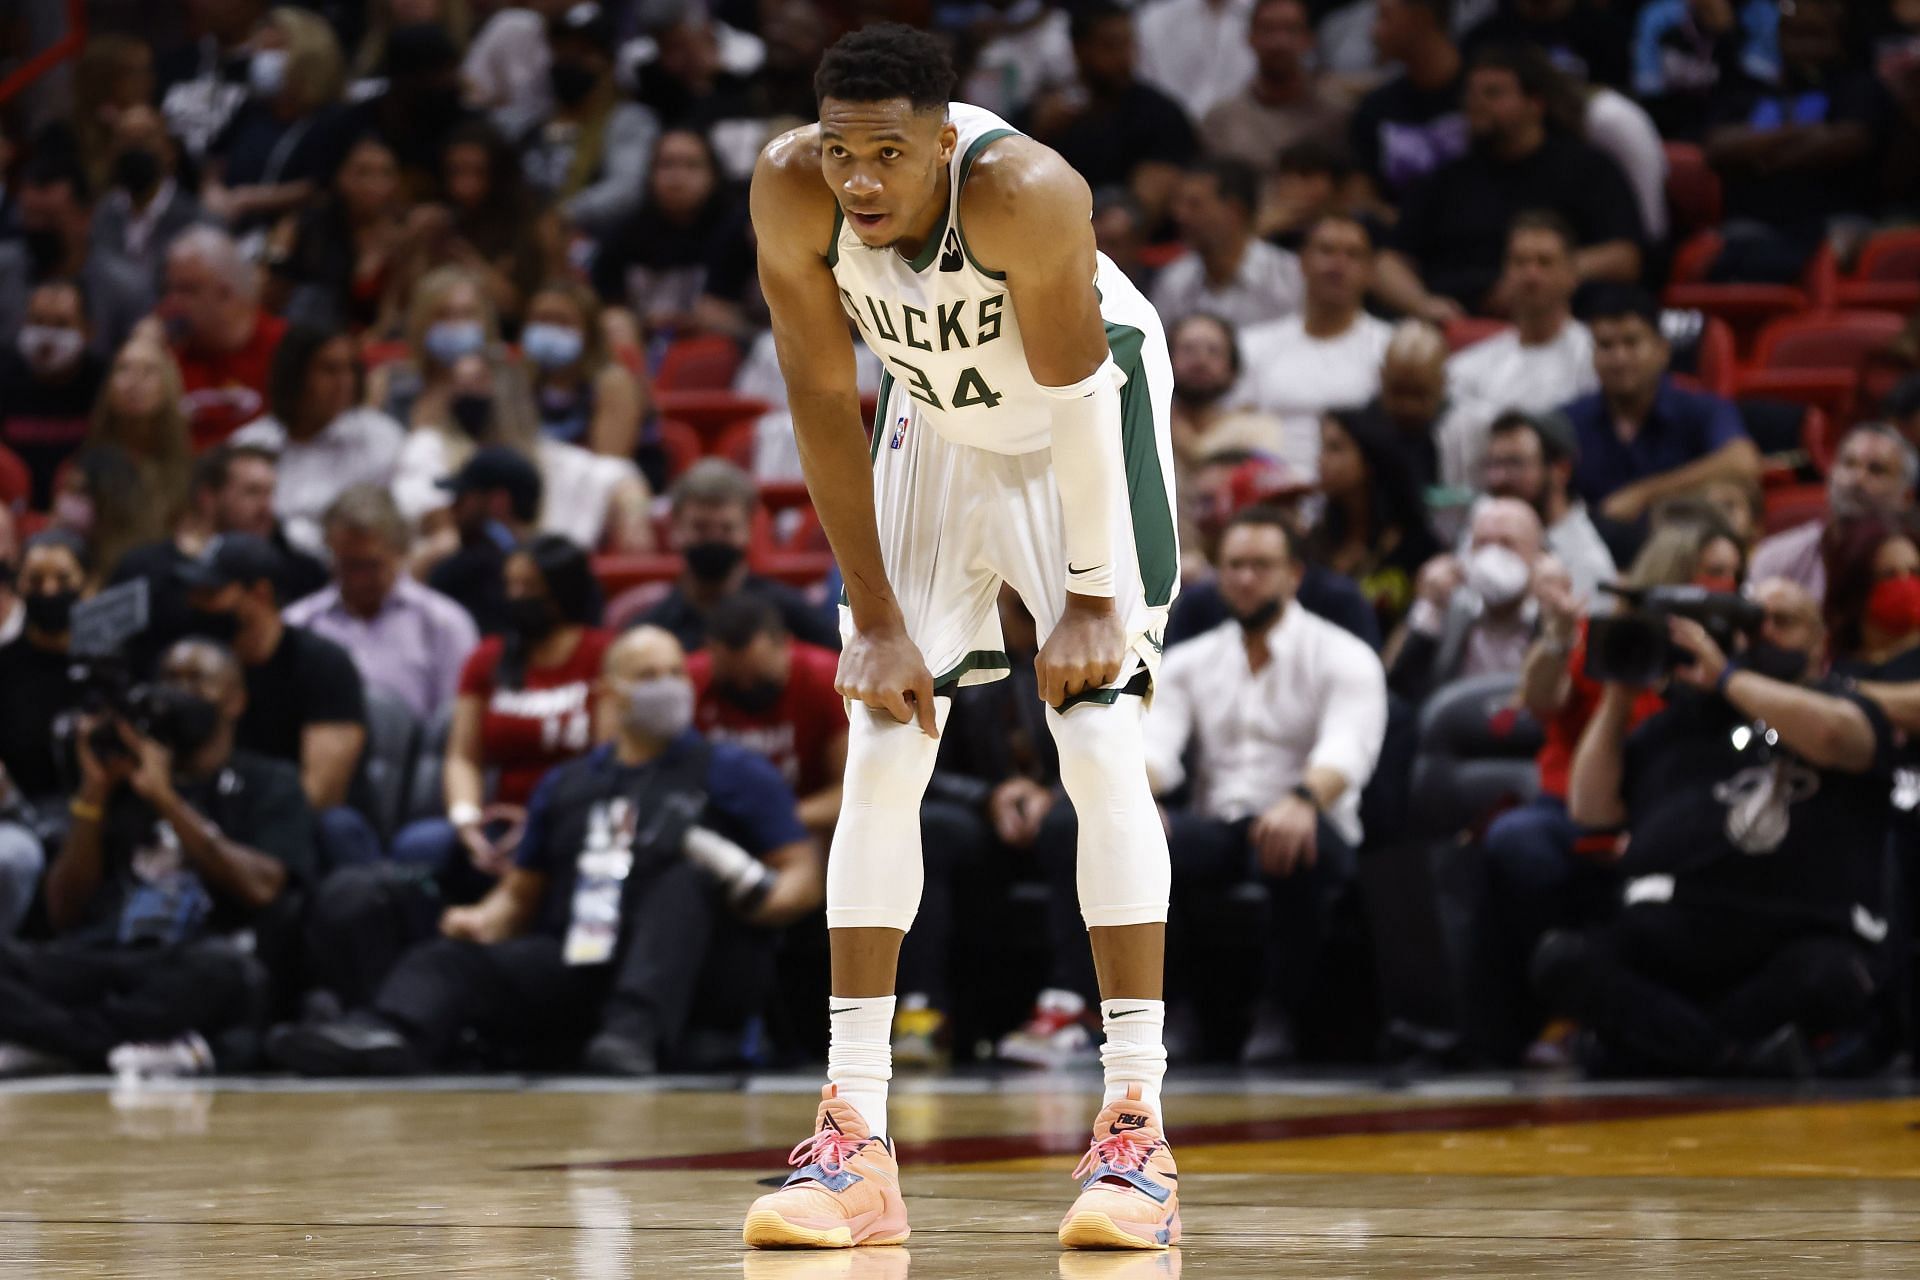 Milwaukee Bucks superstar Giannis Antetokounmpo will be a favorite for Defensive Player of the Year.